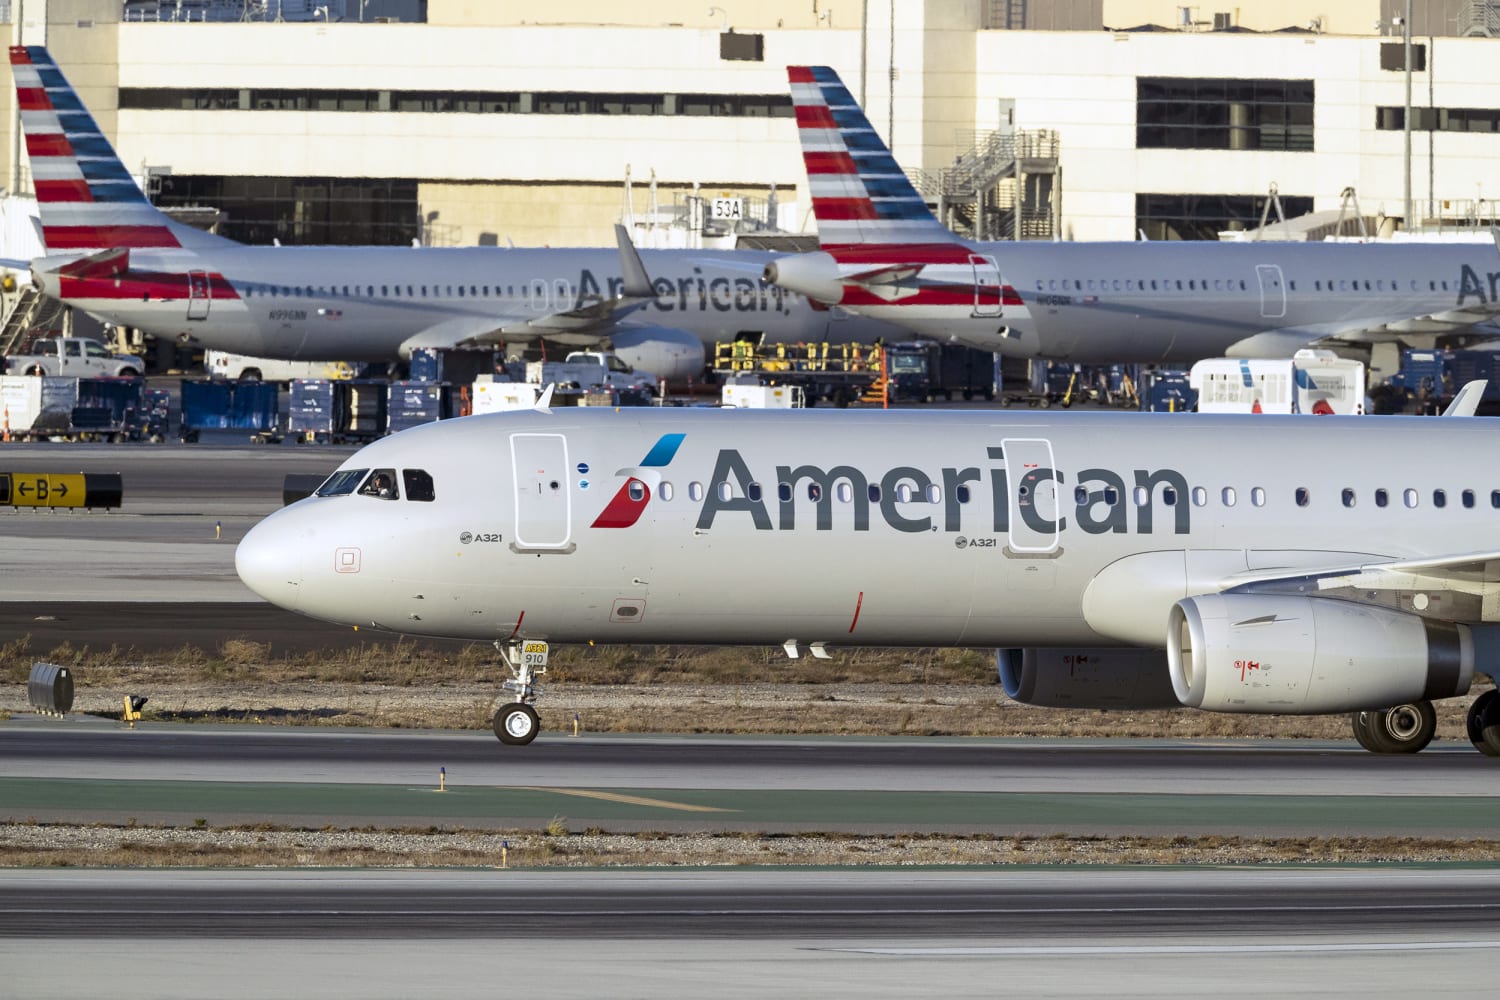 6 suffer minor injuries as American Airlines flight makes ‘hard landing’ in Maui